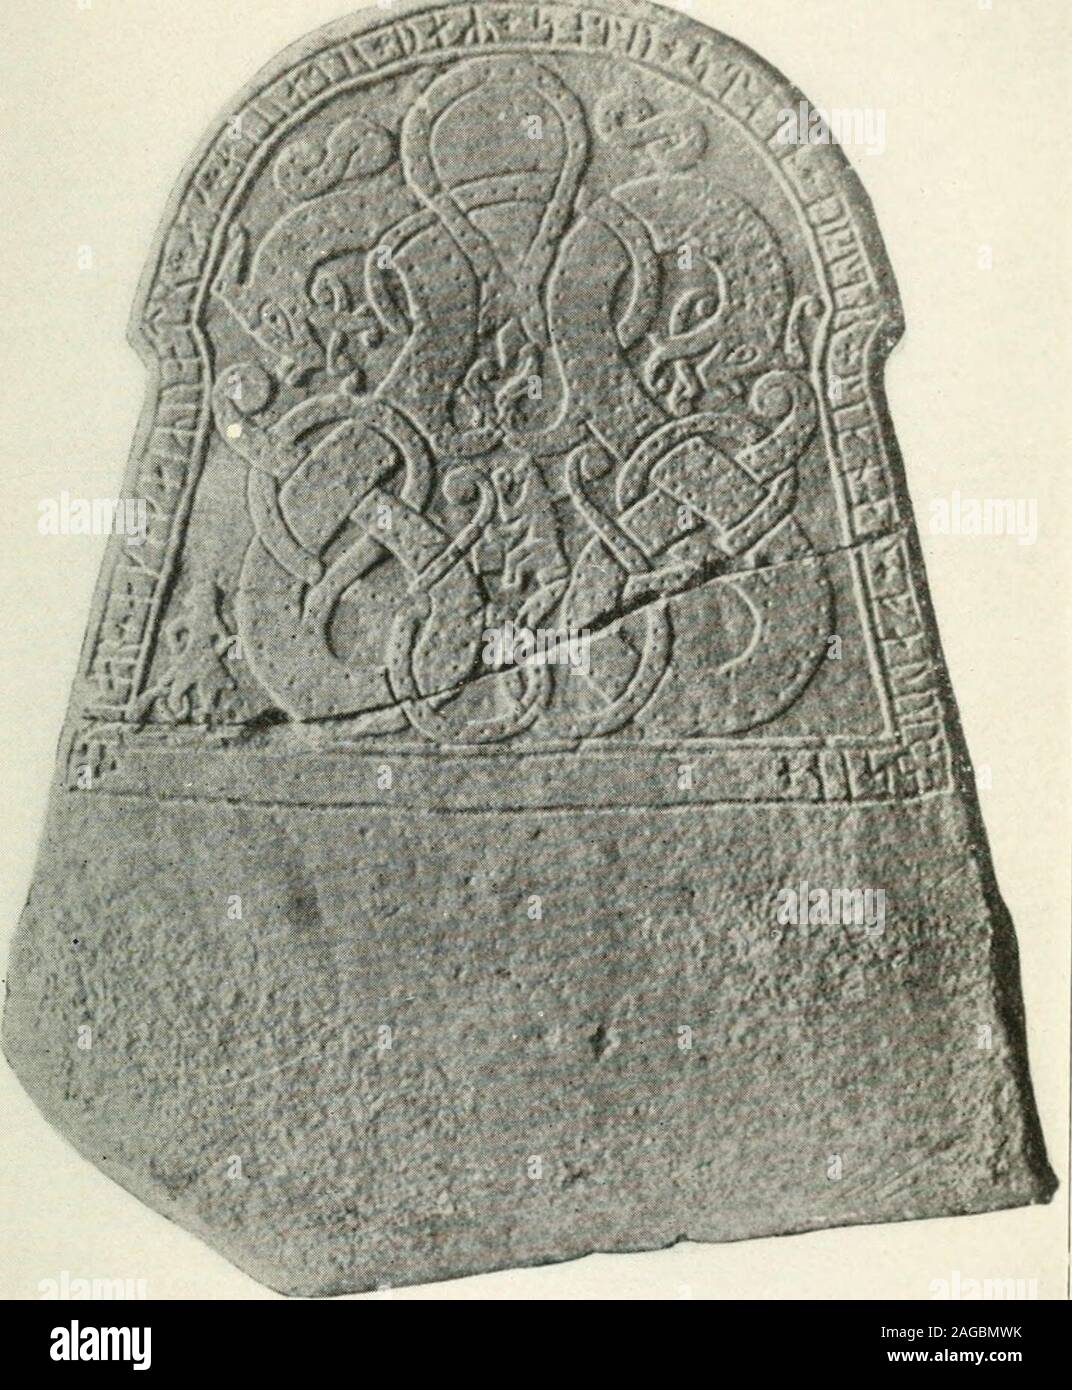 . Social Scandinavia in the Viking age. ompanied by the figure of his hammer; or the symbolof some other god. In the late Viking Age elaborately carved stones cameinto use, particularly in the island of Gotland. Thesestones showed genuine skill in workmanship. The topswere commonly semi-circular or horseshoe shaped, andthe surfaces, smooth.^ Such stones occasionally had 36/6td., 7. 37 Wimmer, Ludv. F. A.. Die Runenschrift, 335-382. The following are typical runic inscriptions: Ragnhild erected thisstone for Ale Salvegode, the highly honorable temple priest. Ales eonsraised this mound in memory Stock Photo